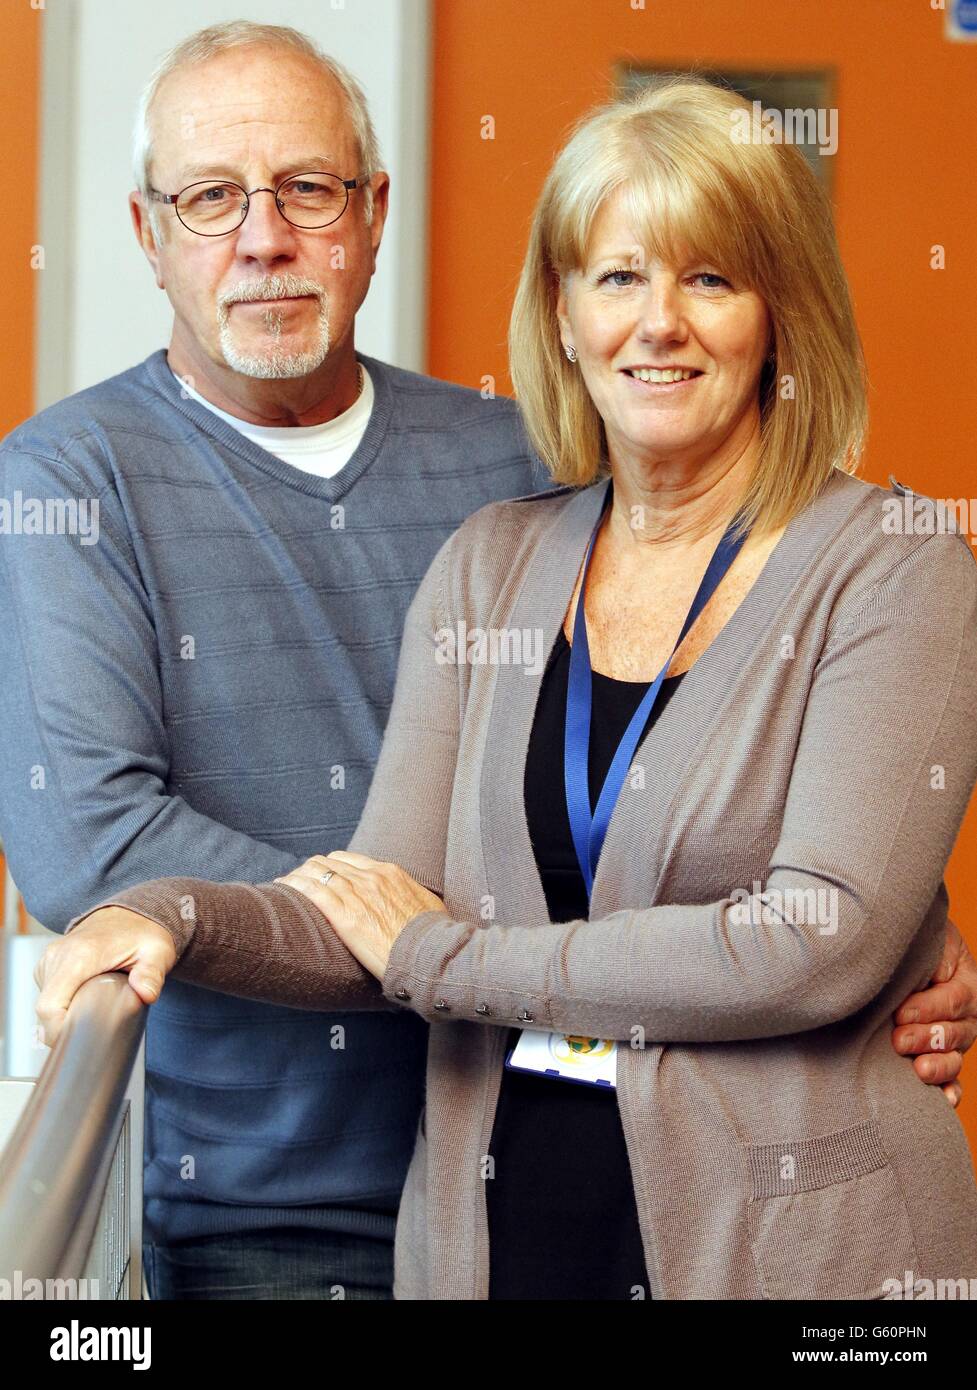 Colin and Wendy Parry, the parents of a young boy killed in the IRA bomb attack in Warrington 20 years ago said they have 'given up' hope that the perpetrators will ever be brought to justice. Stock Photo